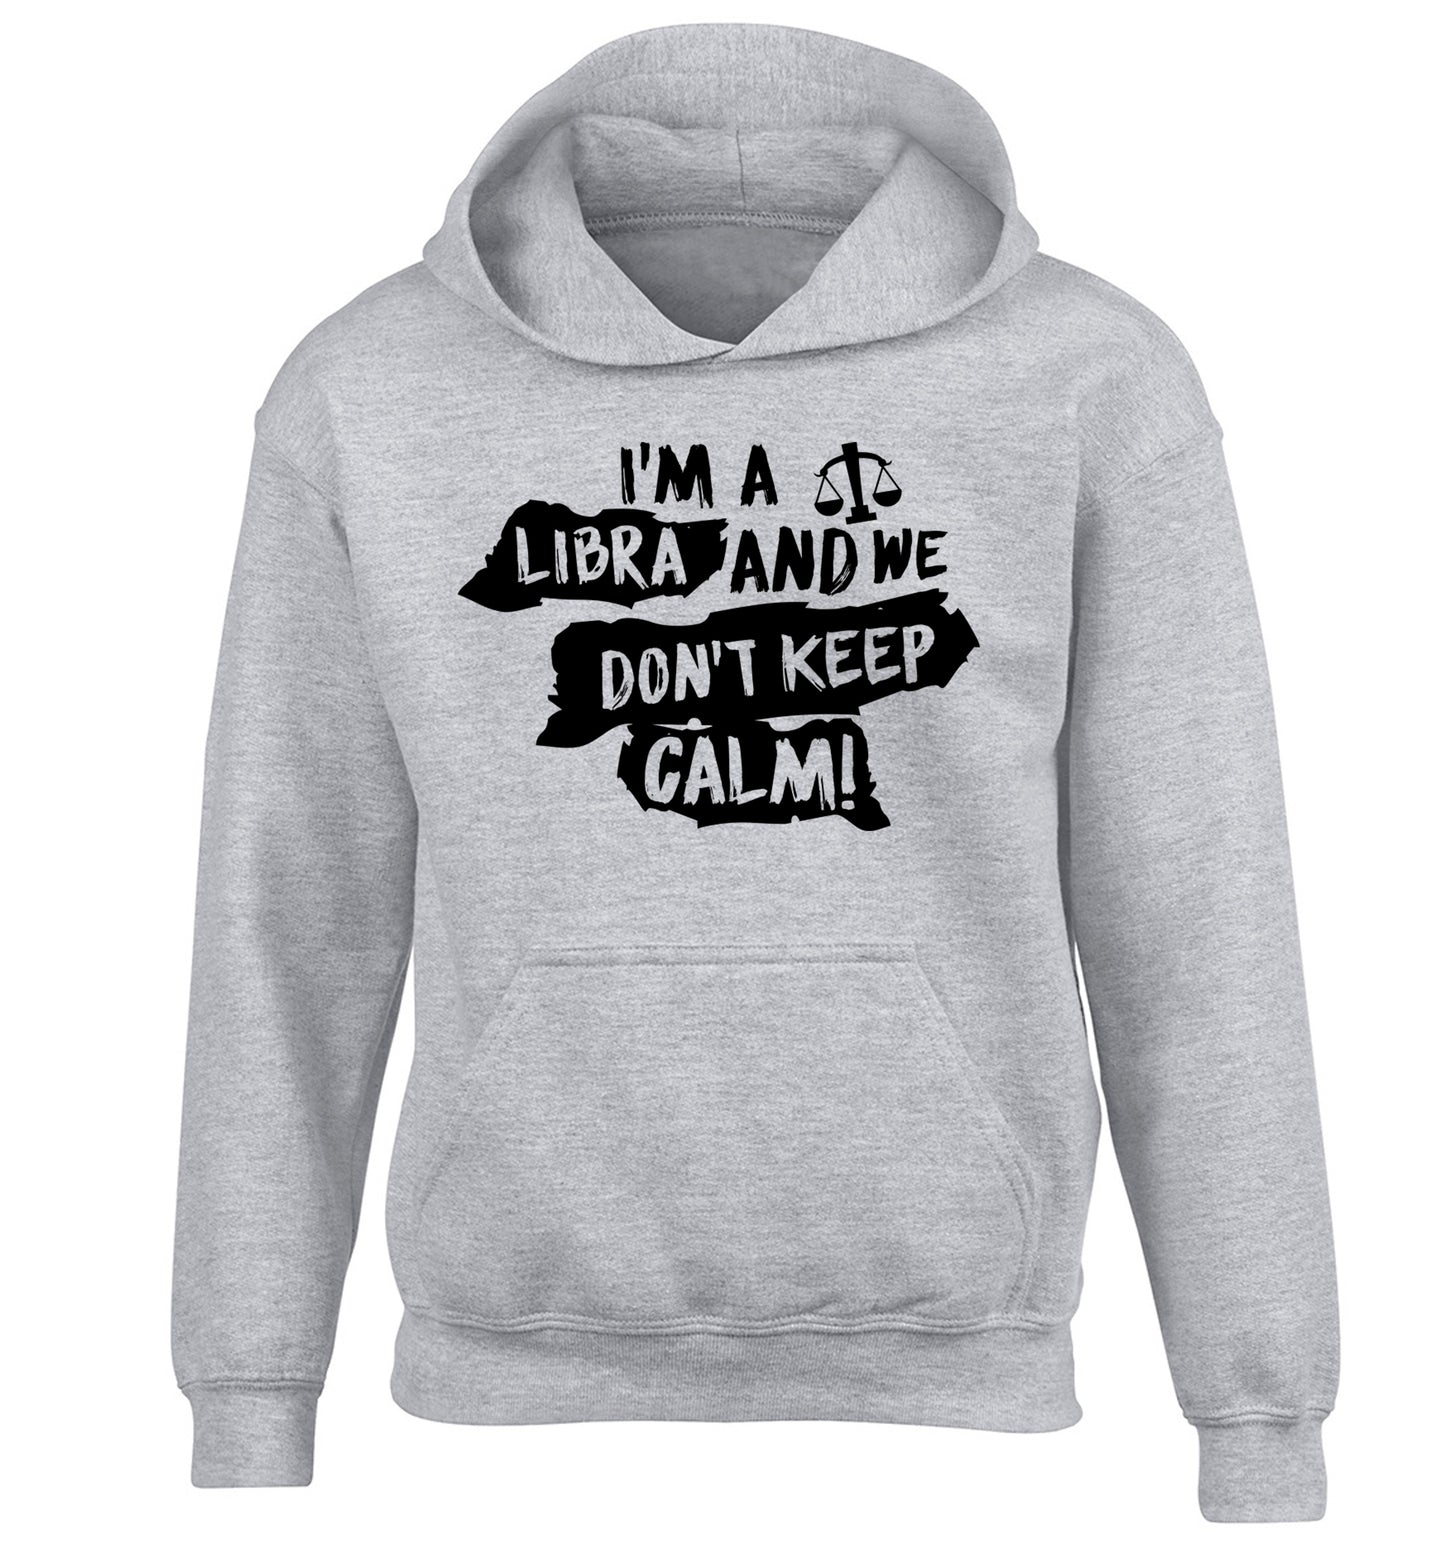 I'm a libra and we don't keep calm children's grey hoodie 12-13 Years